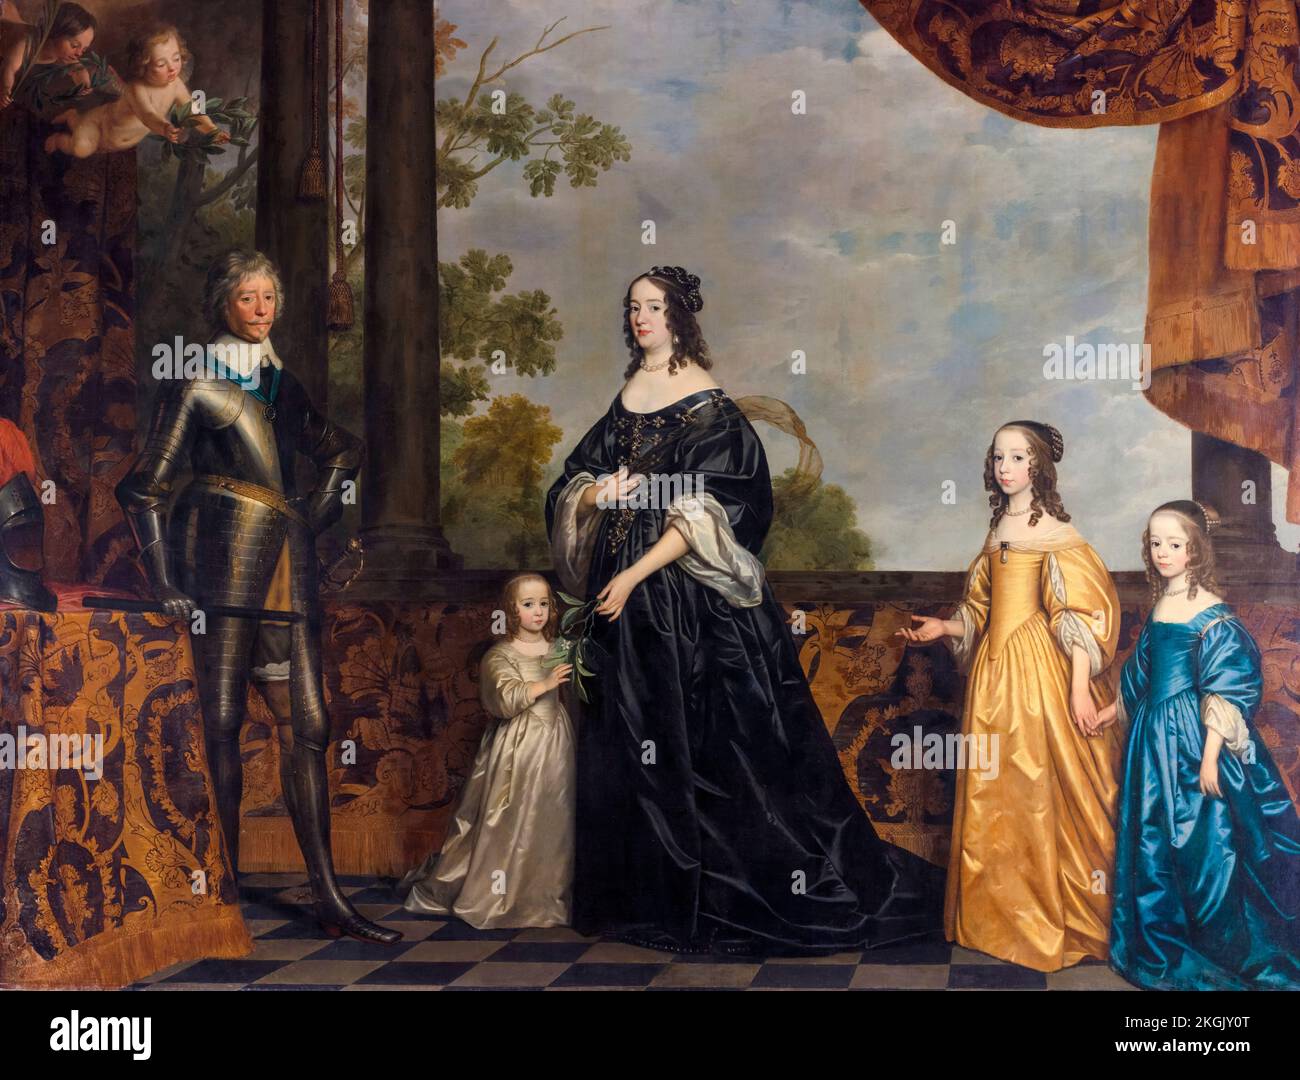 Frederick Henry (1584-1647), sovereign prince of Orange, his Consort, Amalia of Solms-Braunfels (1602-1675), and their three youngest daughters (eldest to youngest), Albertine Agnes of Nassau (1634-1696), Henriette Catherine of Nassau (1637-1708), and Maria of Orange-Nassau (1642-1688), family portrait painting in oil on canvas by Gerard van Honthorst, 1647 Stock Photo